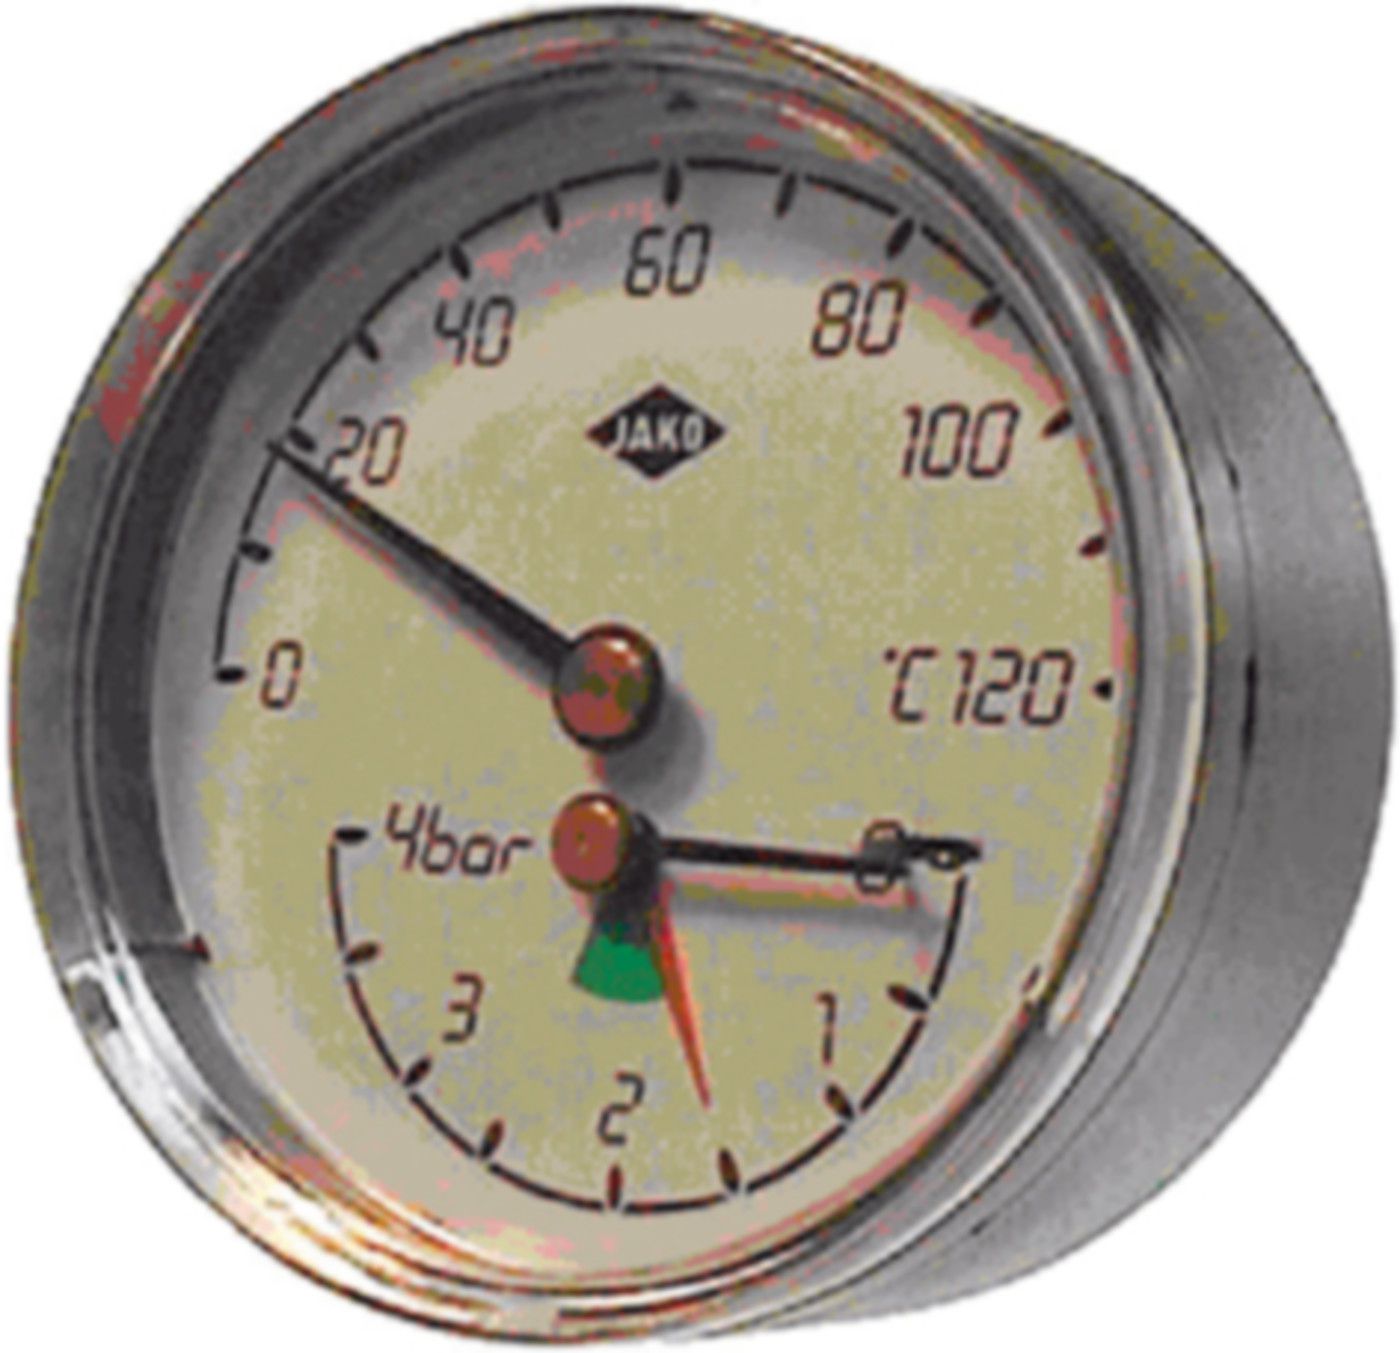 Thermo-Manometer d 80mm 0- 4 Bar "6949.041.2002 Anschluss hinten 1/2"" 120°C" - Jako Mano- und Thermometer